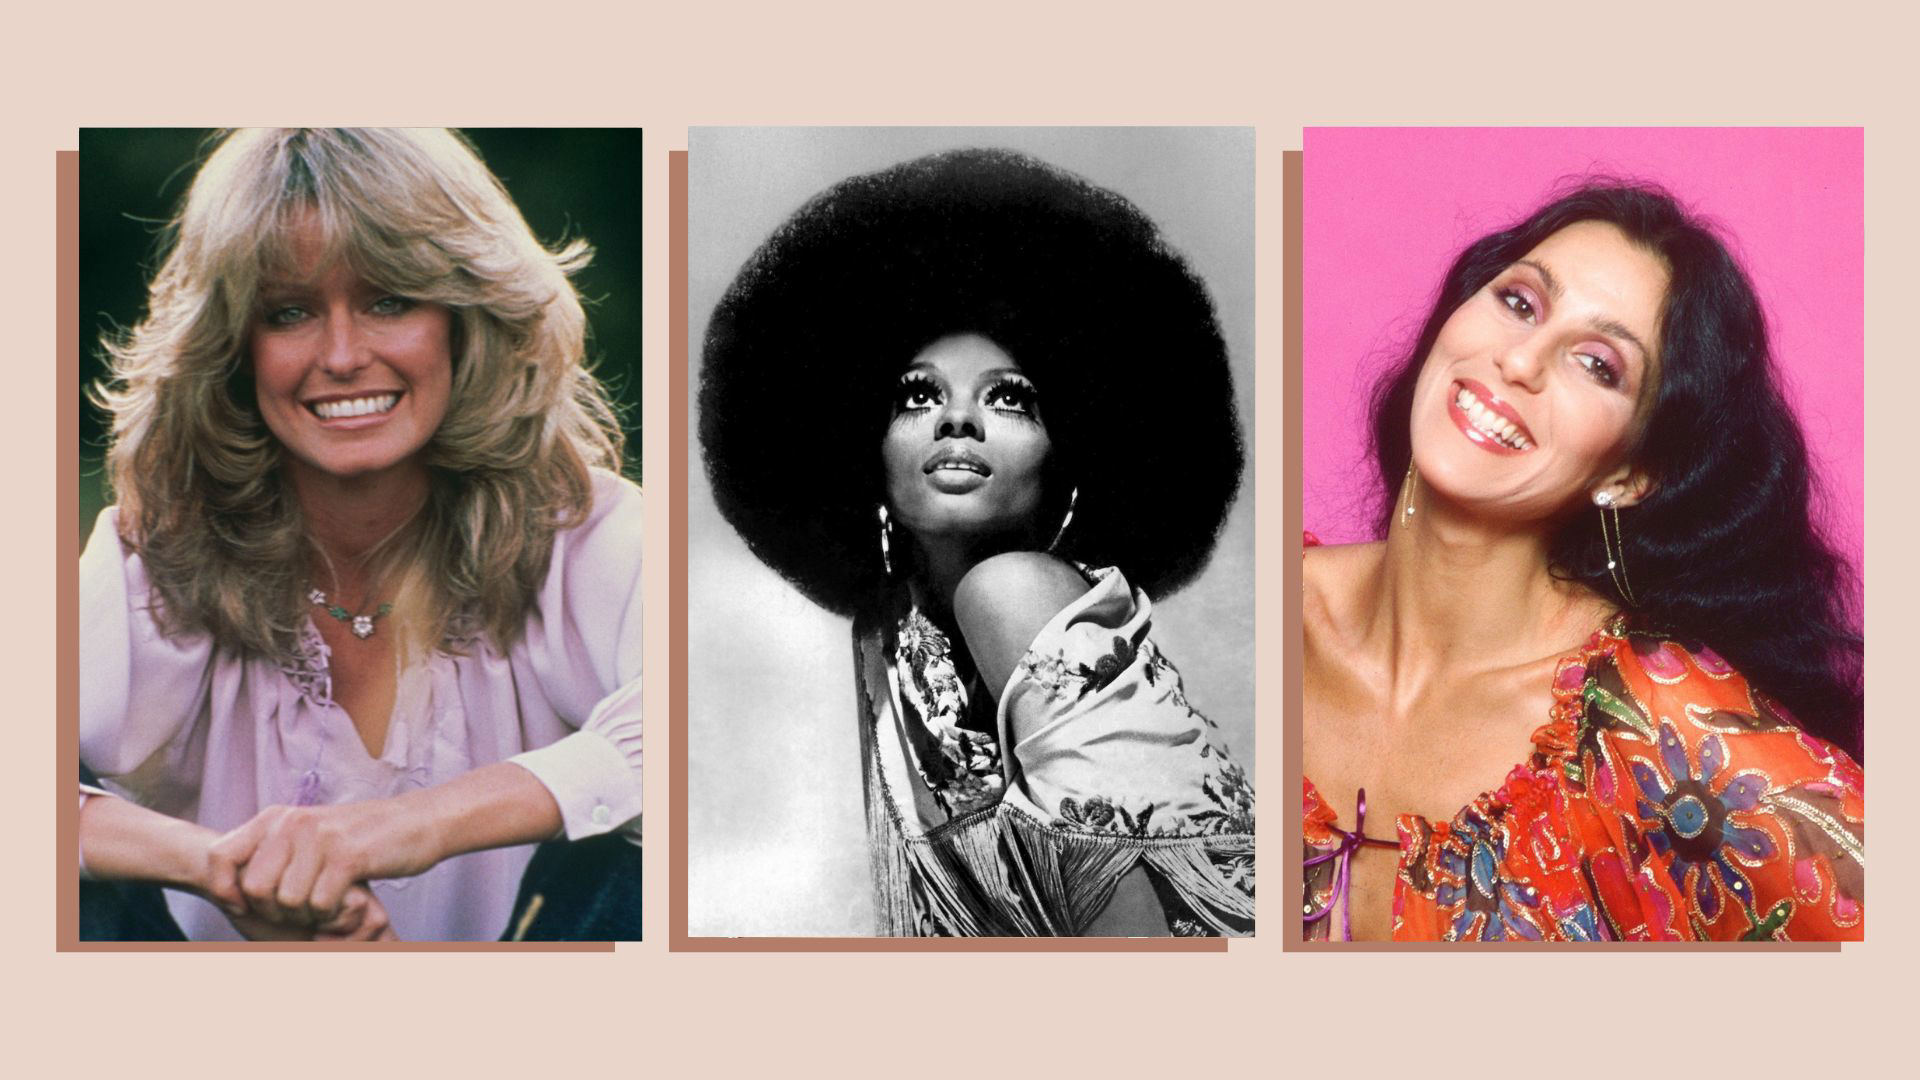 The 31 best celebrity make-up looks inspired by the '70s